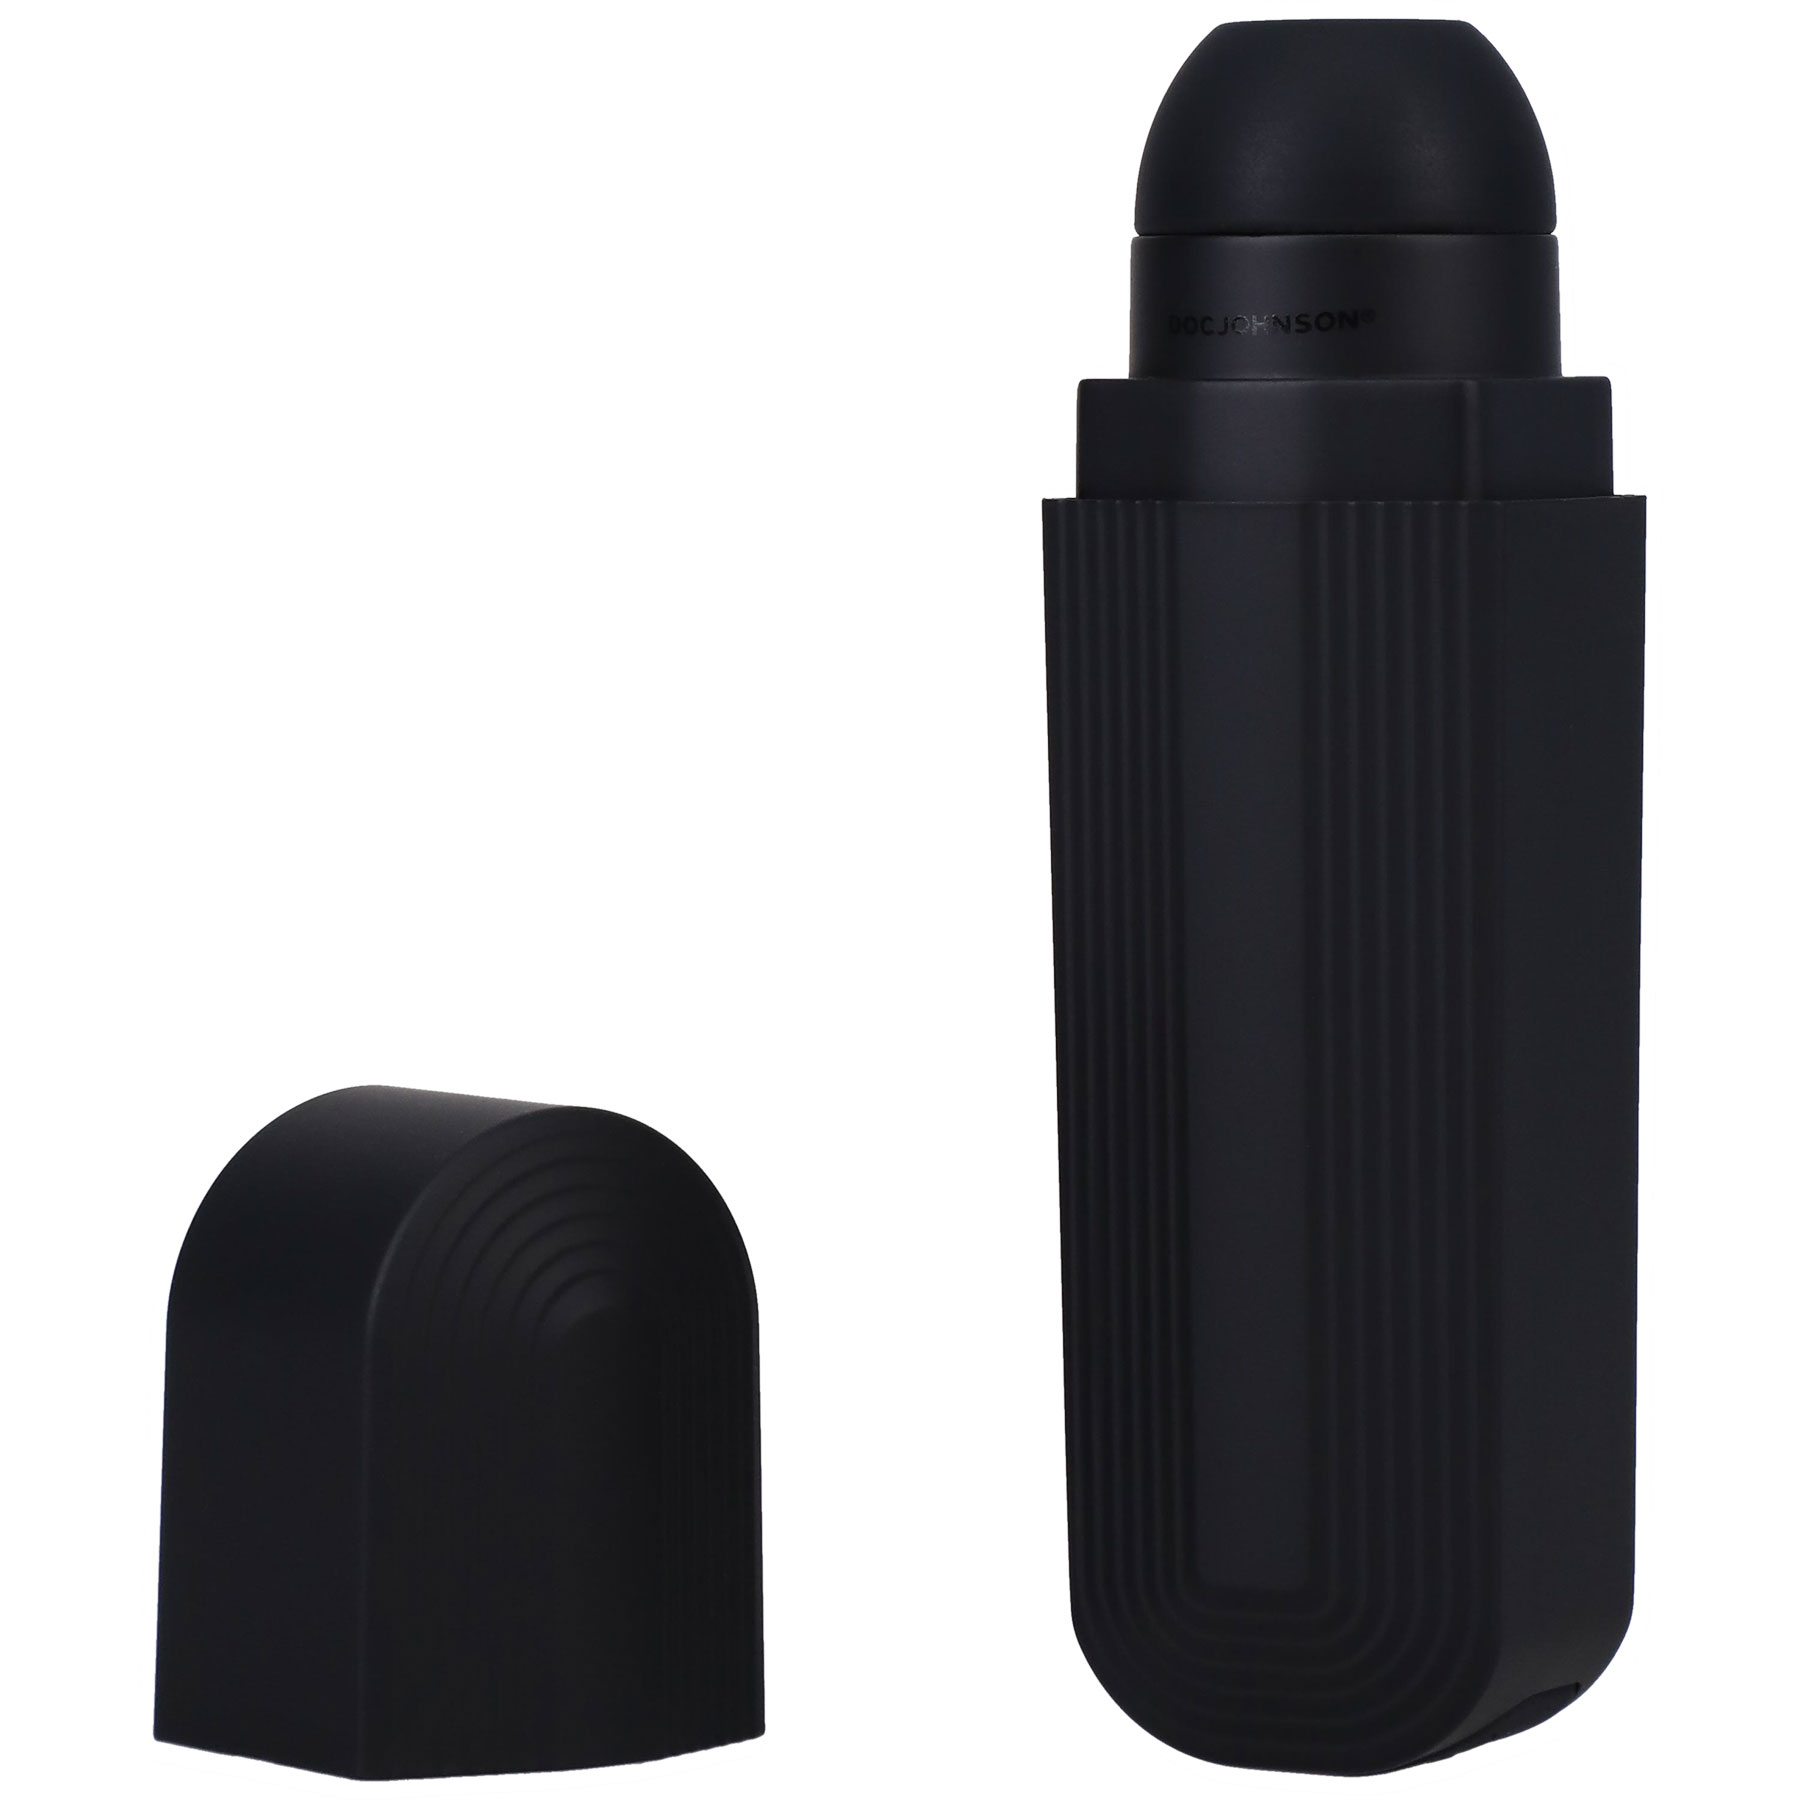 this product sucks sucking clitoral stimulator rechargeable black 